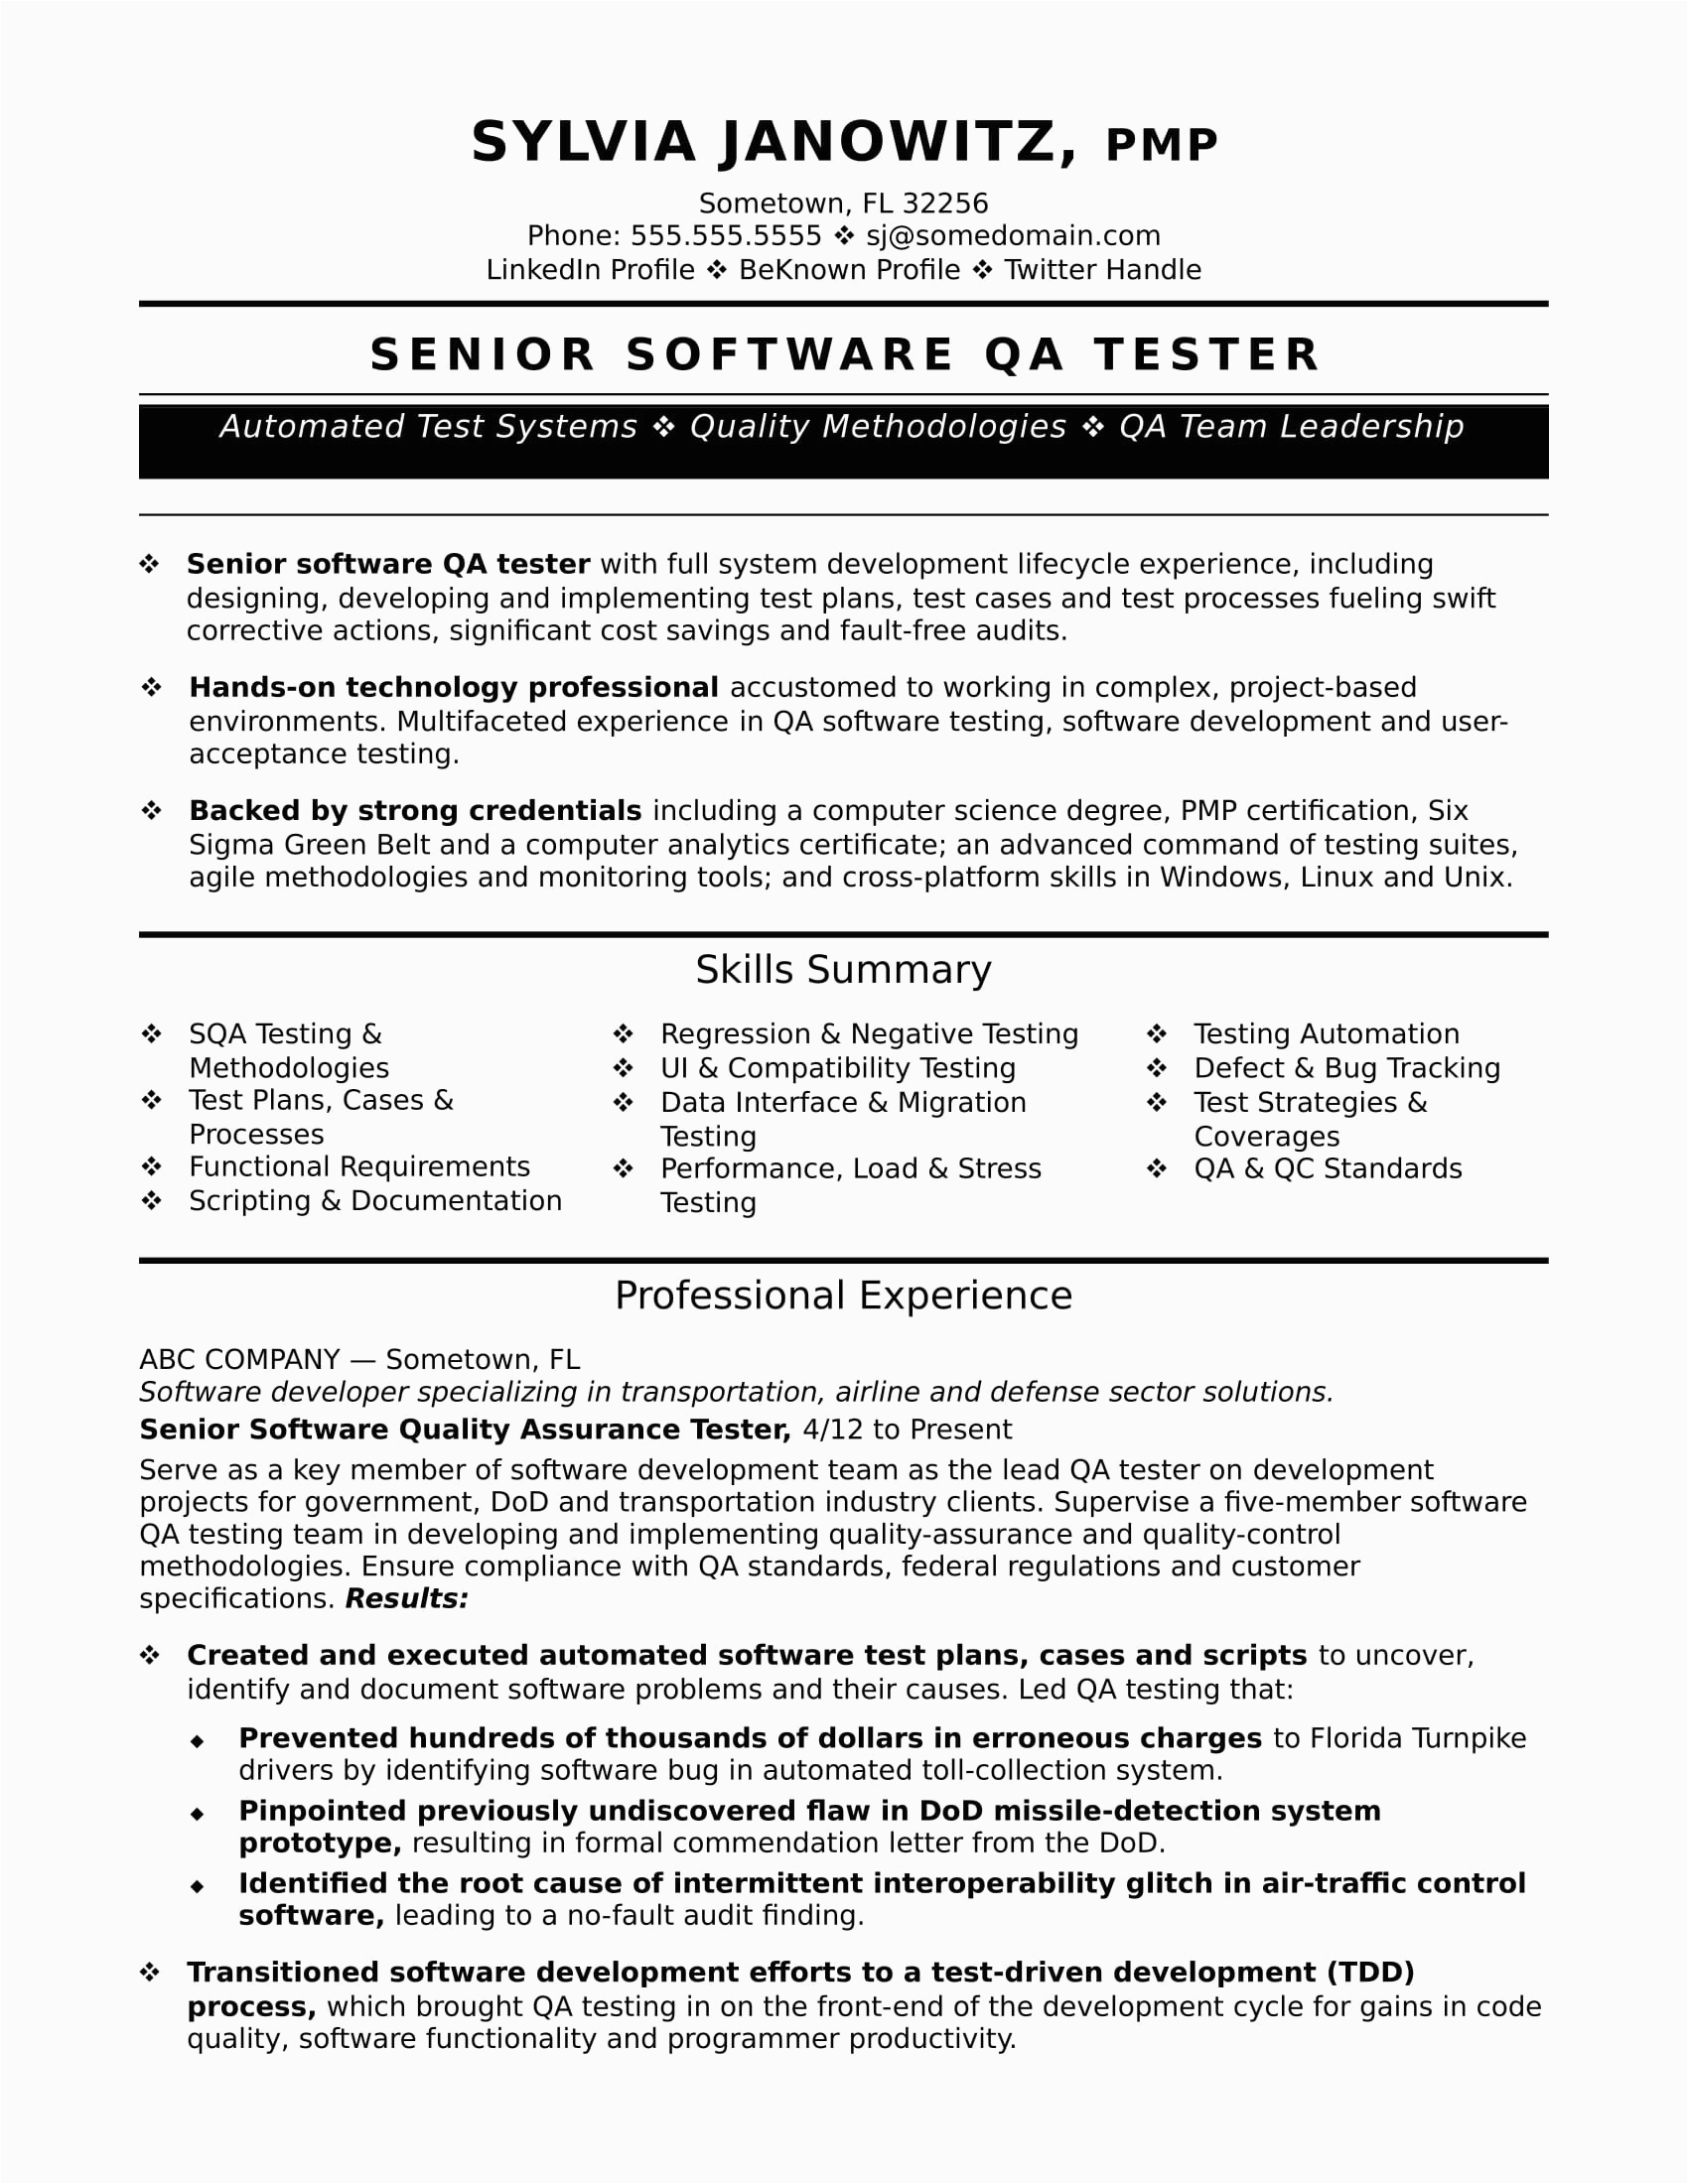 Sample Resume for Experienced software Test Engineer Download Experienced Qa software Tester Resume Sample